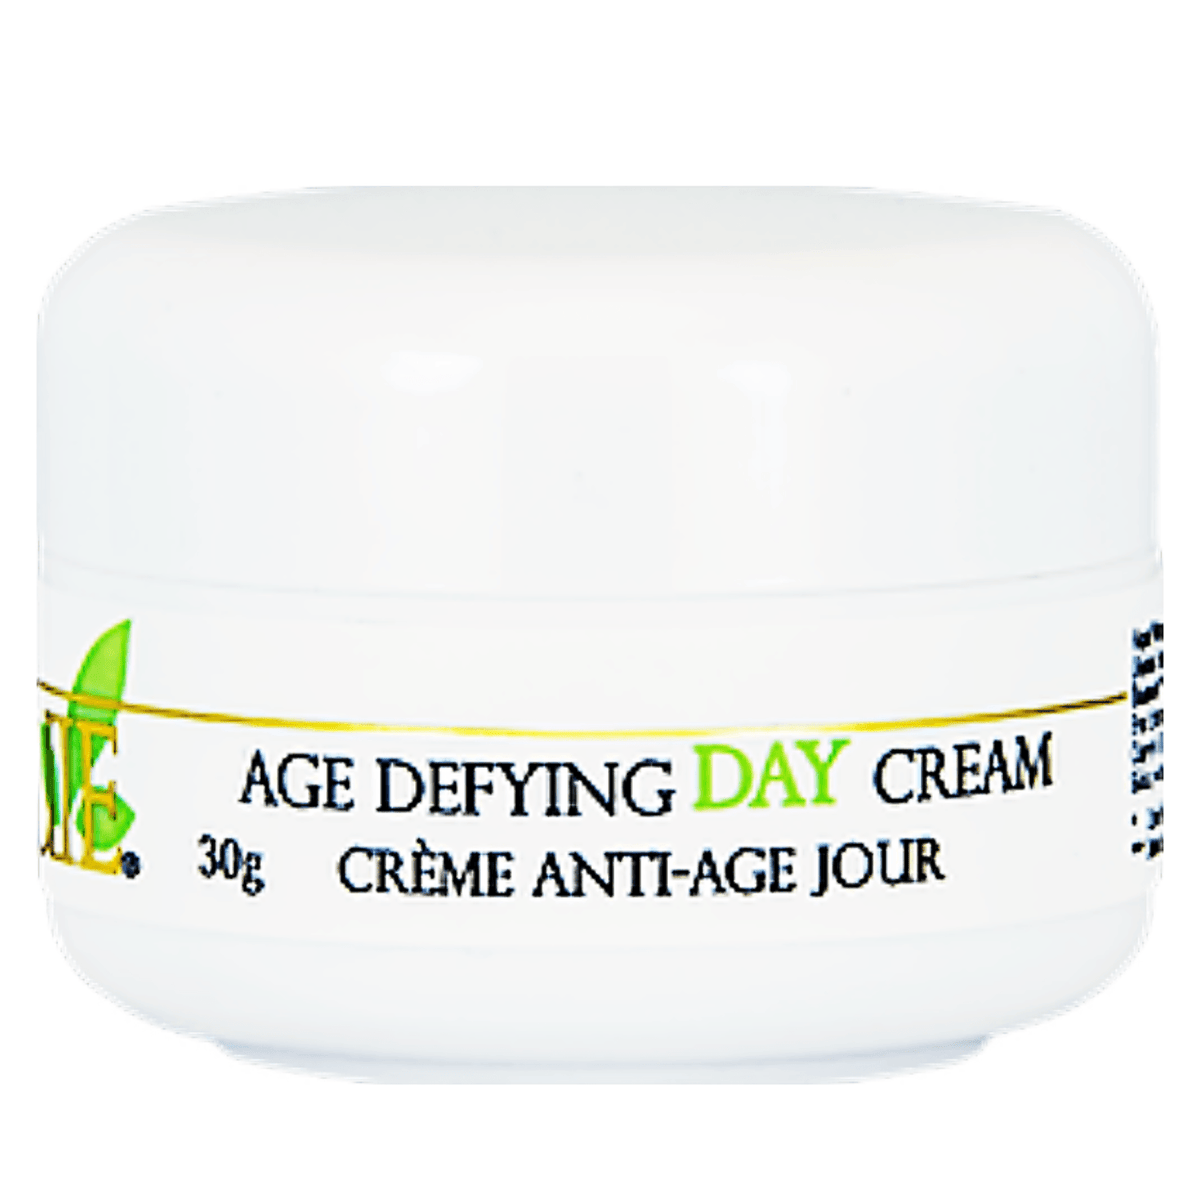 Dr. Louie Age Defying Day Cream 30gms Face Moisturizer at Village Vitamin Store